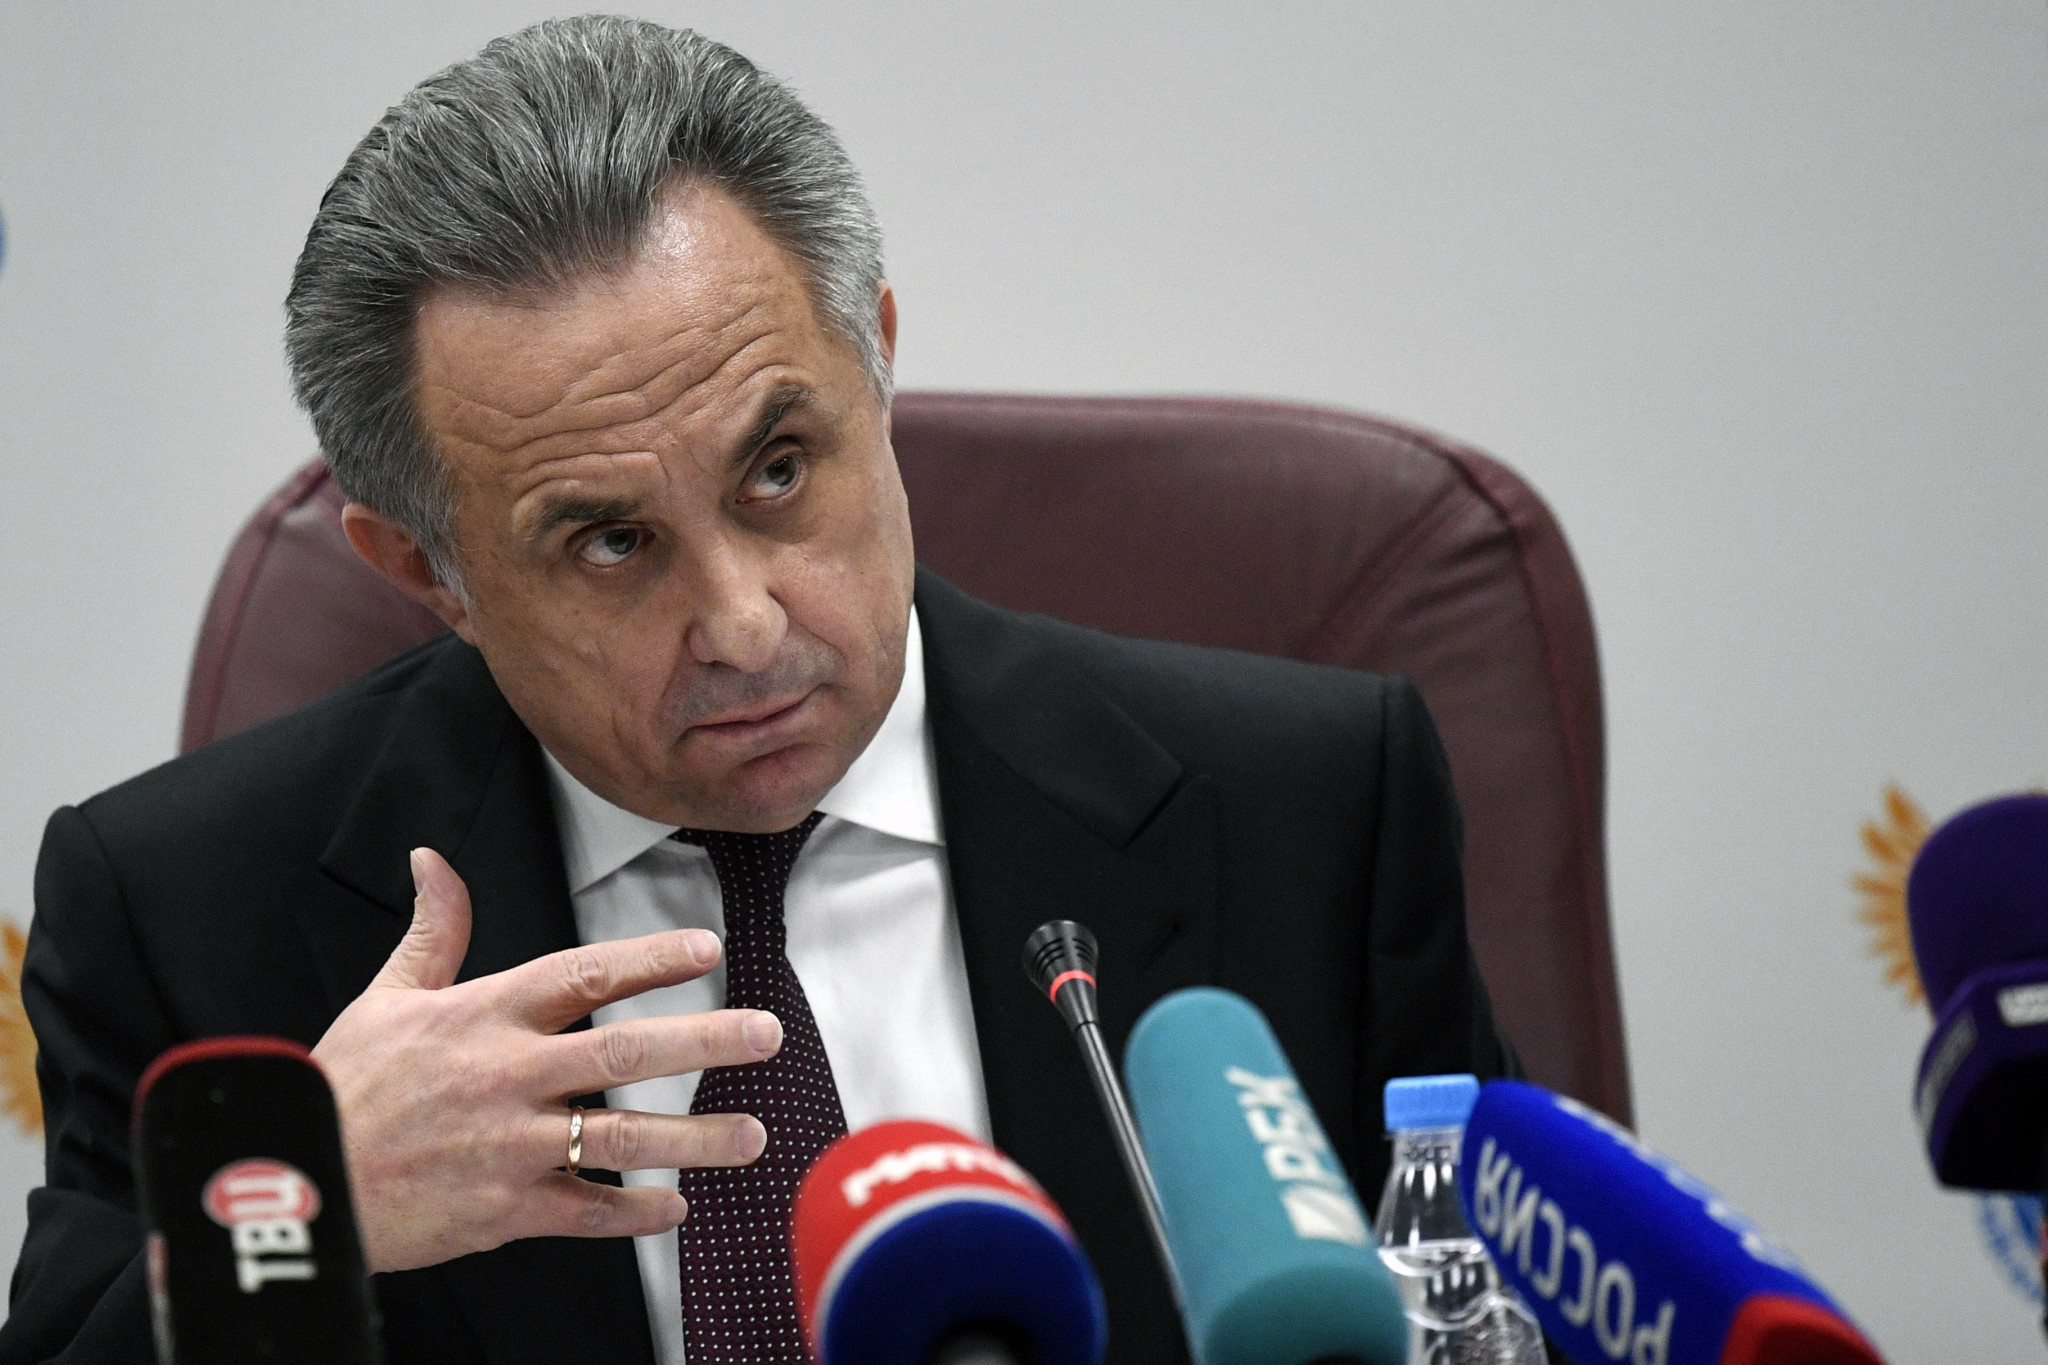 Vitaly Mutko has spoken out yet again about the Russian doping scandal ©Getty Images